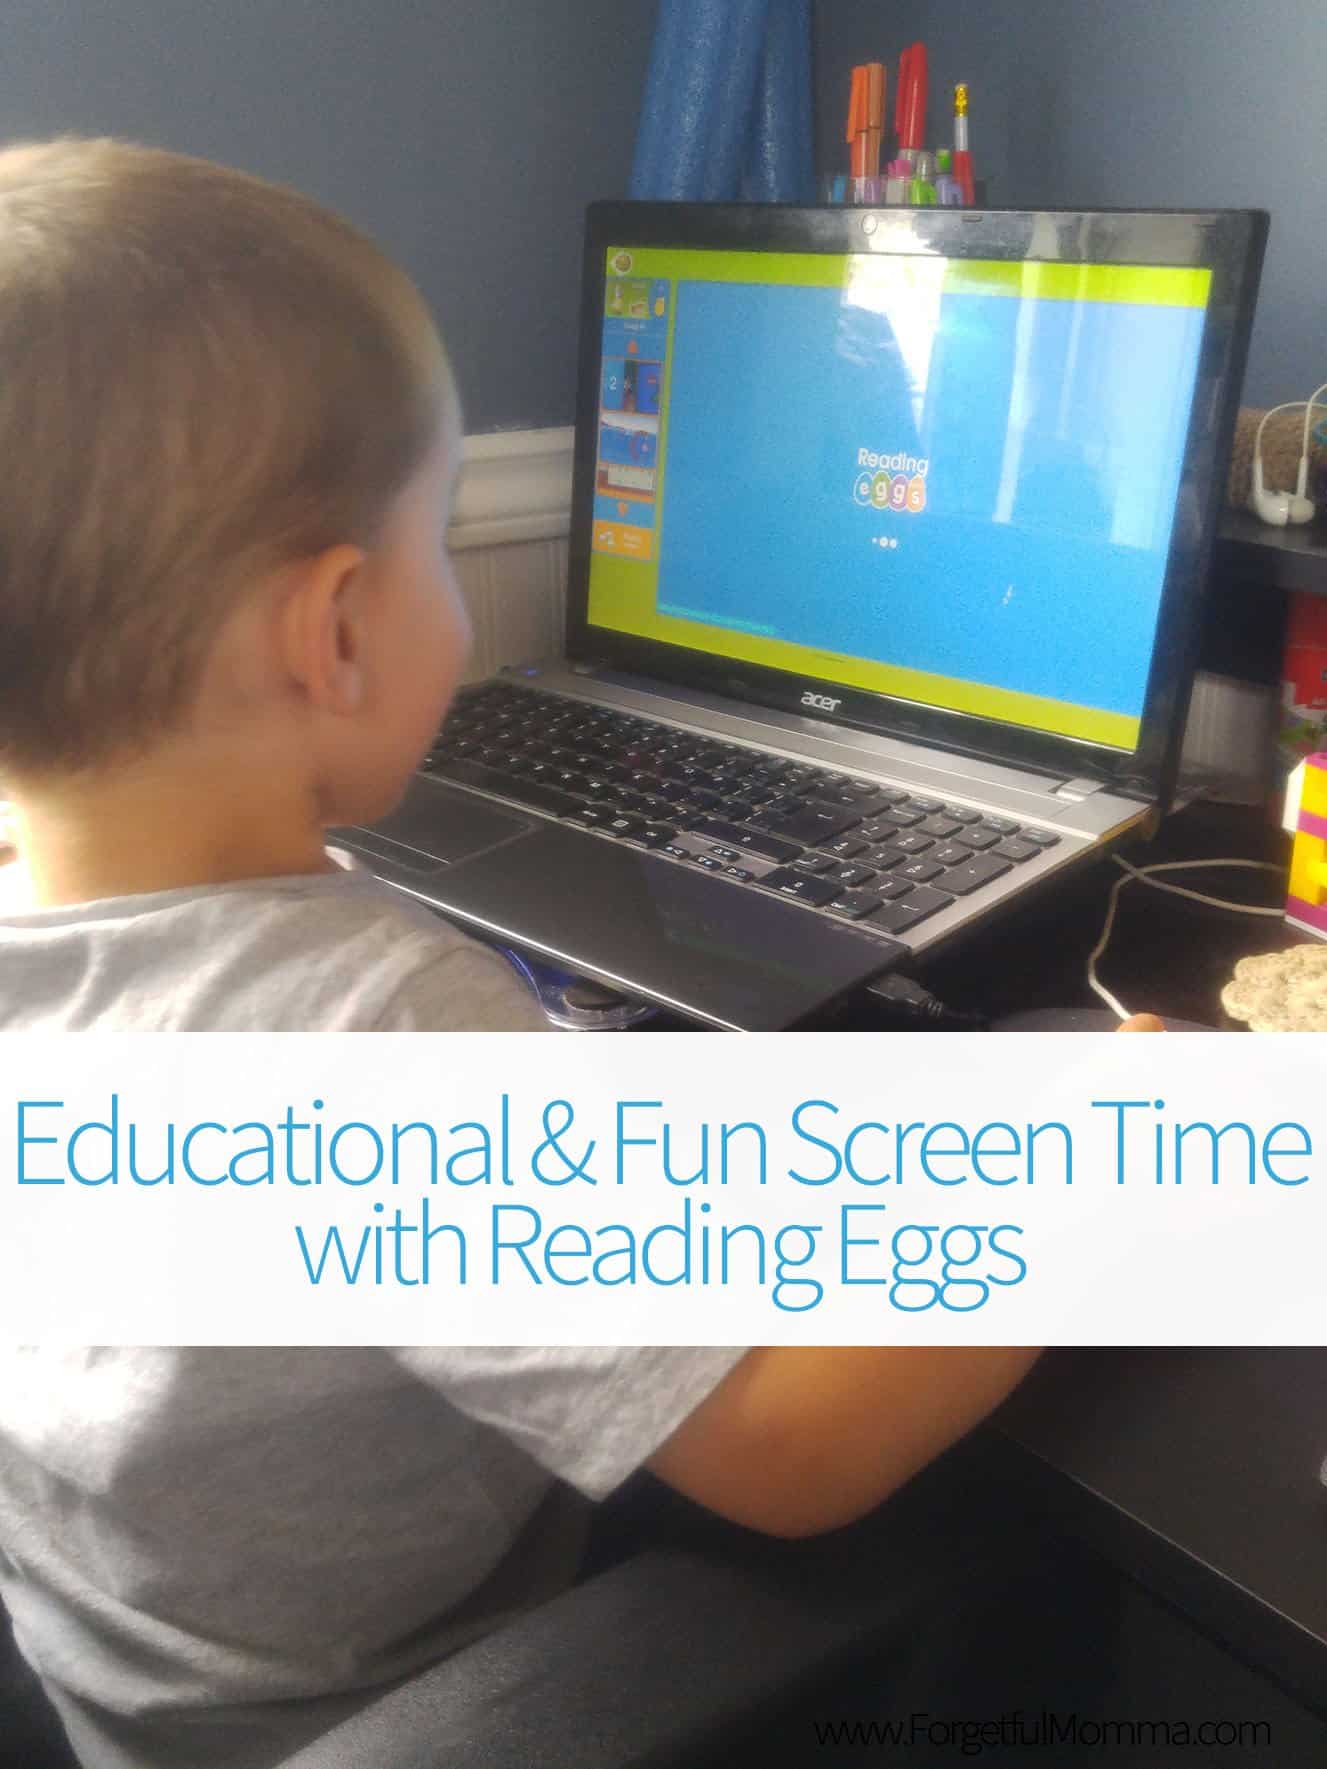 Educational & Fun Screen Time with Reading Eggs